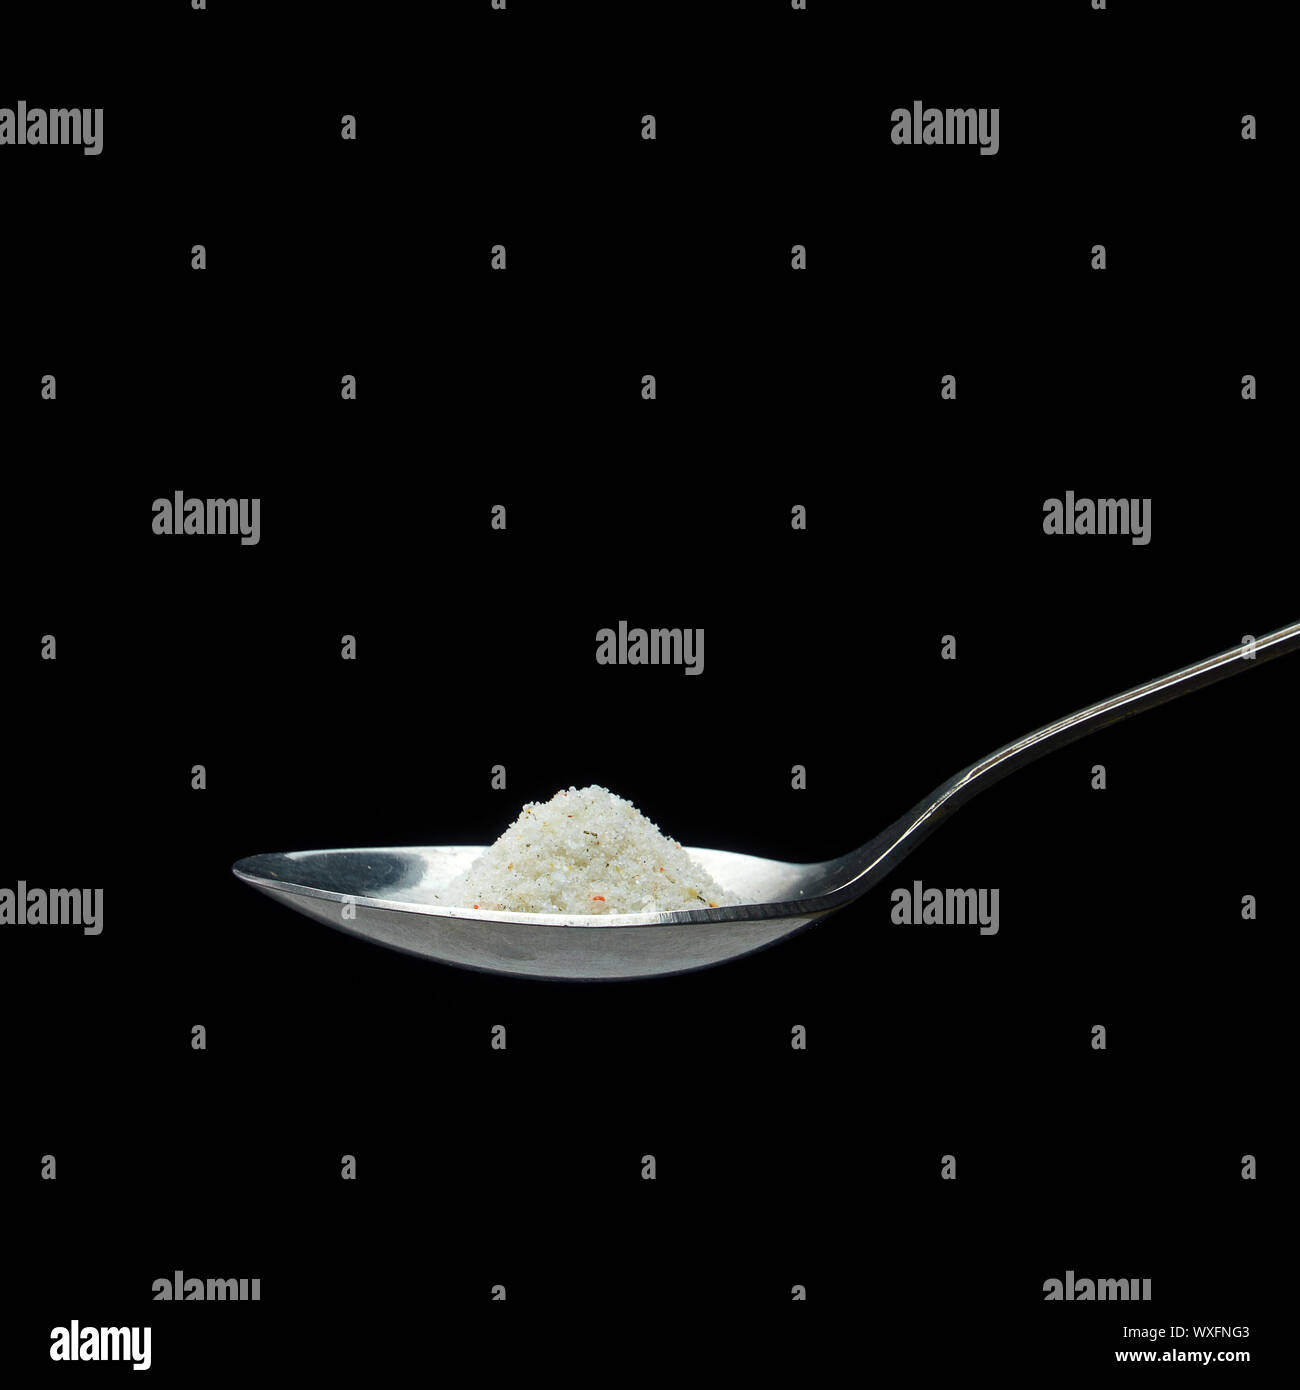 A LARGE SPOON OF SALT OR SEASONING ON A DARK BACKGROUND Stock Photo